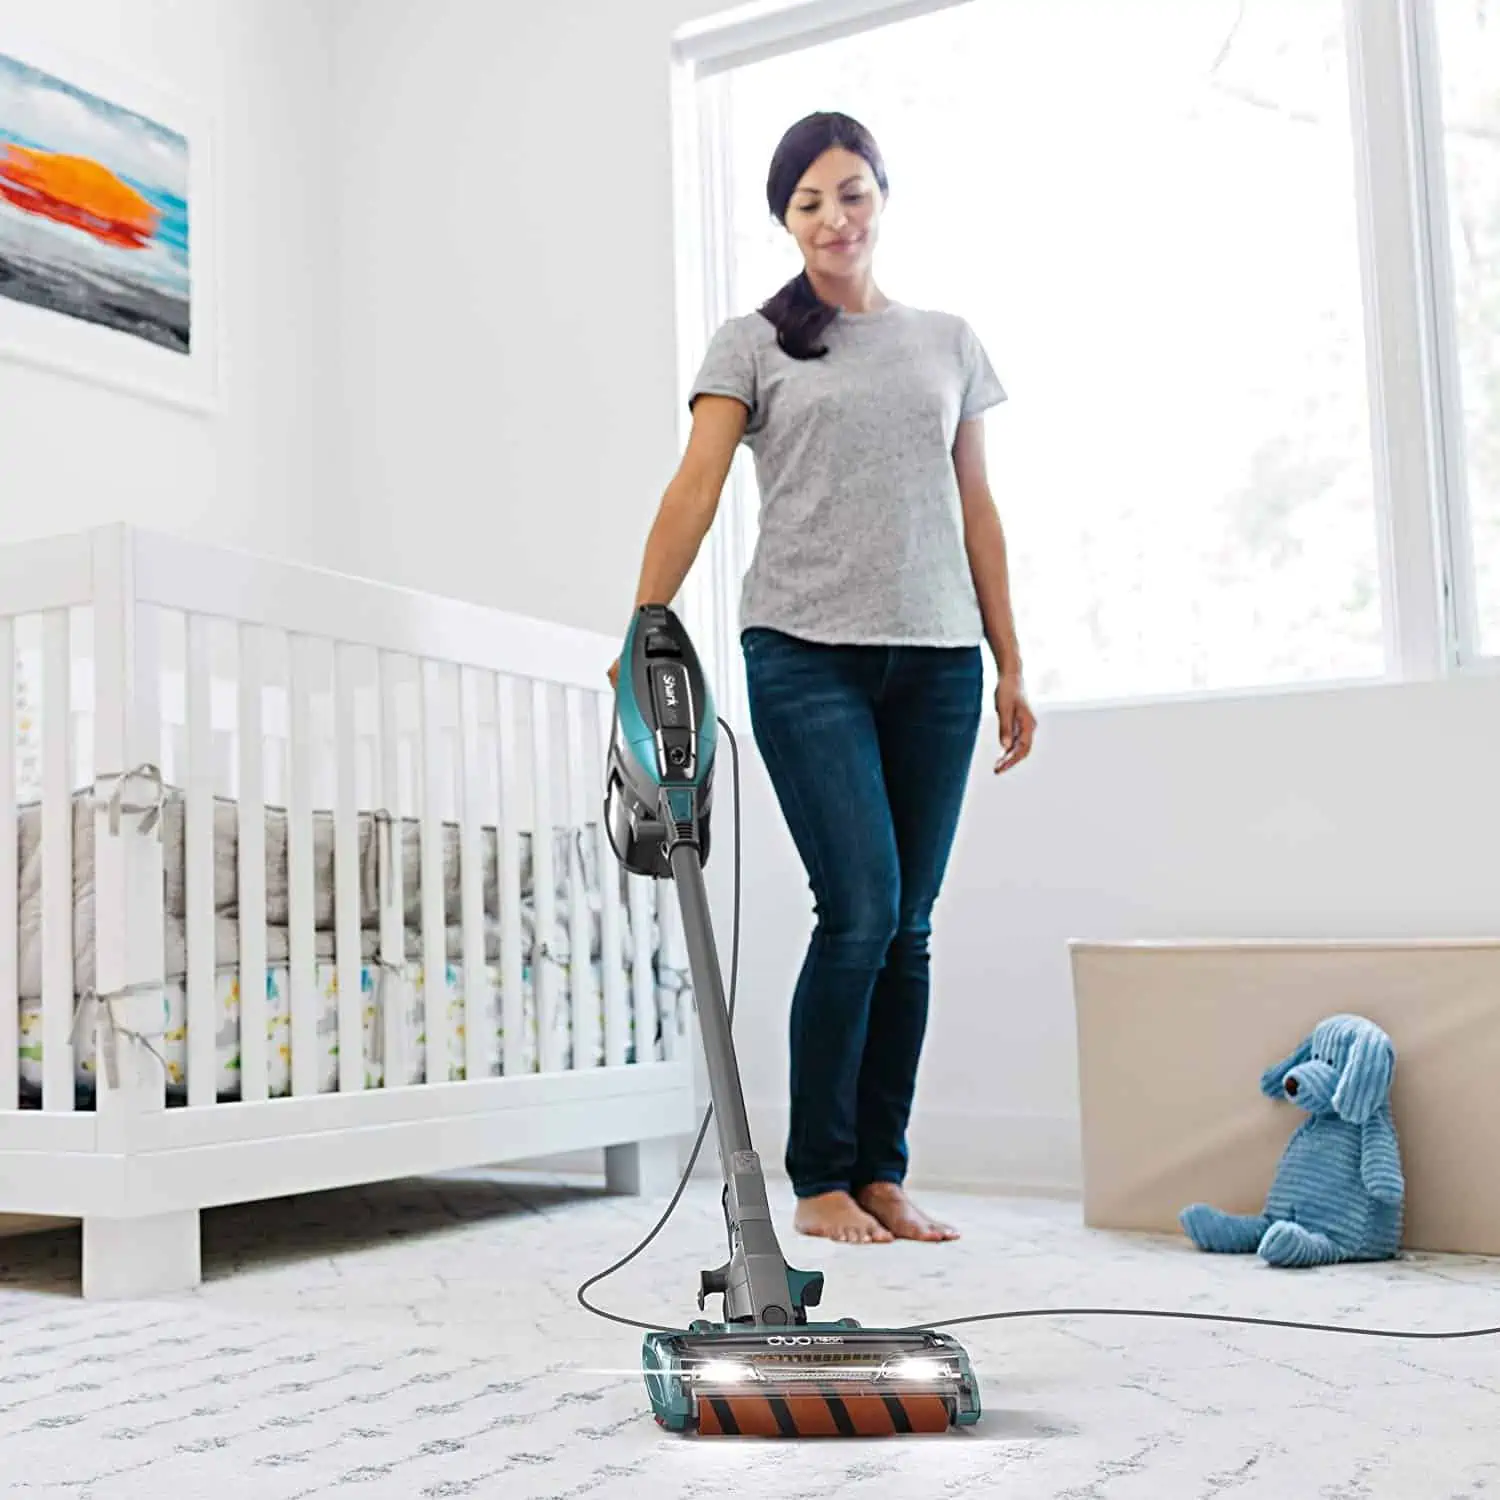 A person standing in a room, with Stick Vacuum